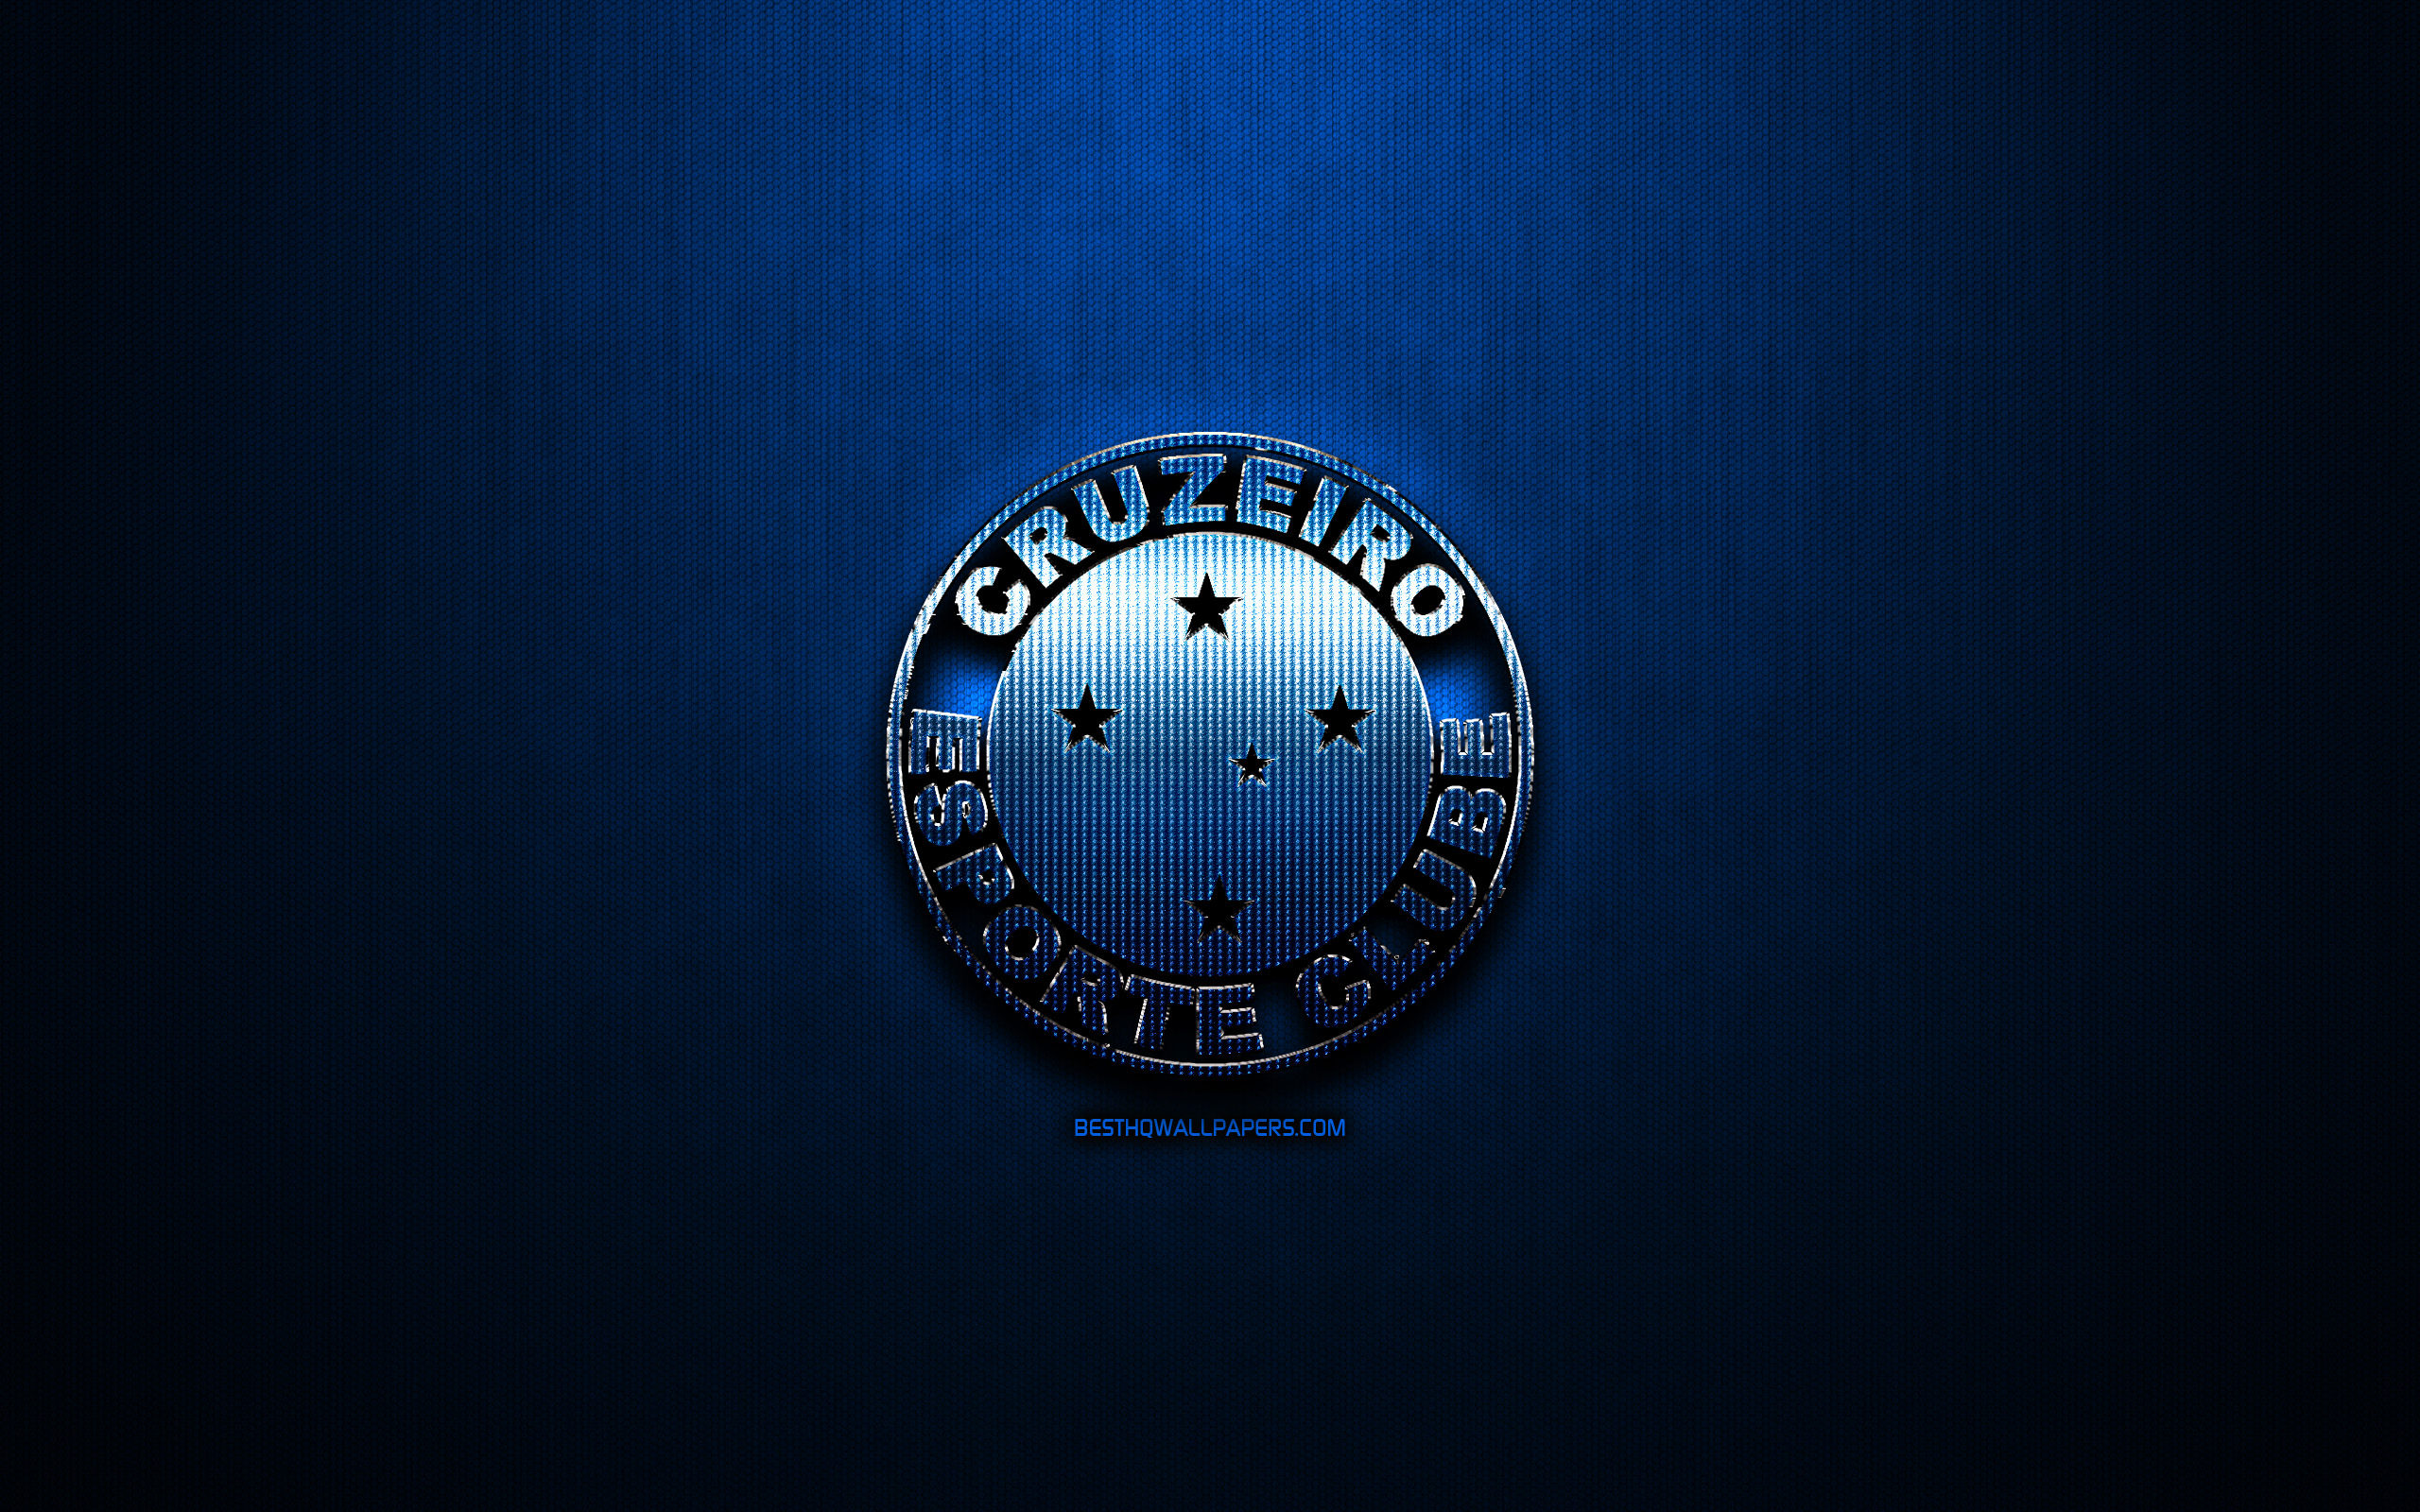 Free download Download wallpapers Cruzeiro FC blue metal background